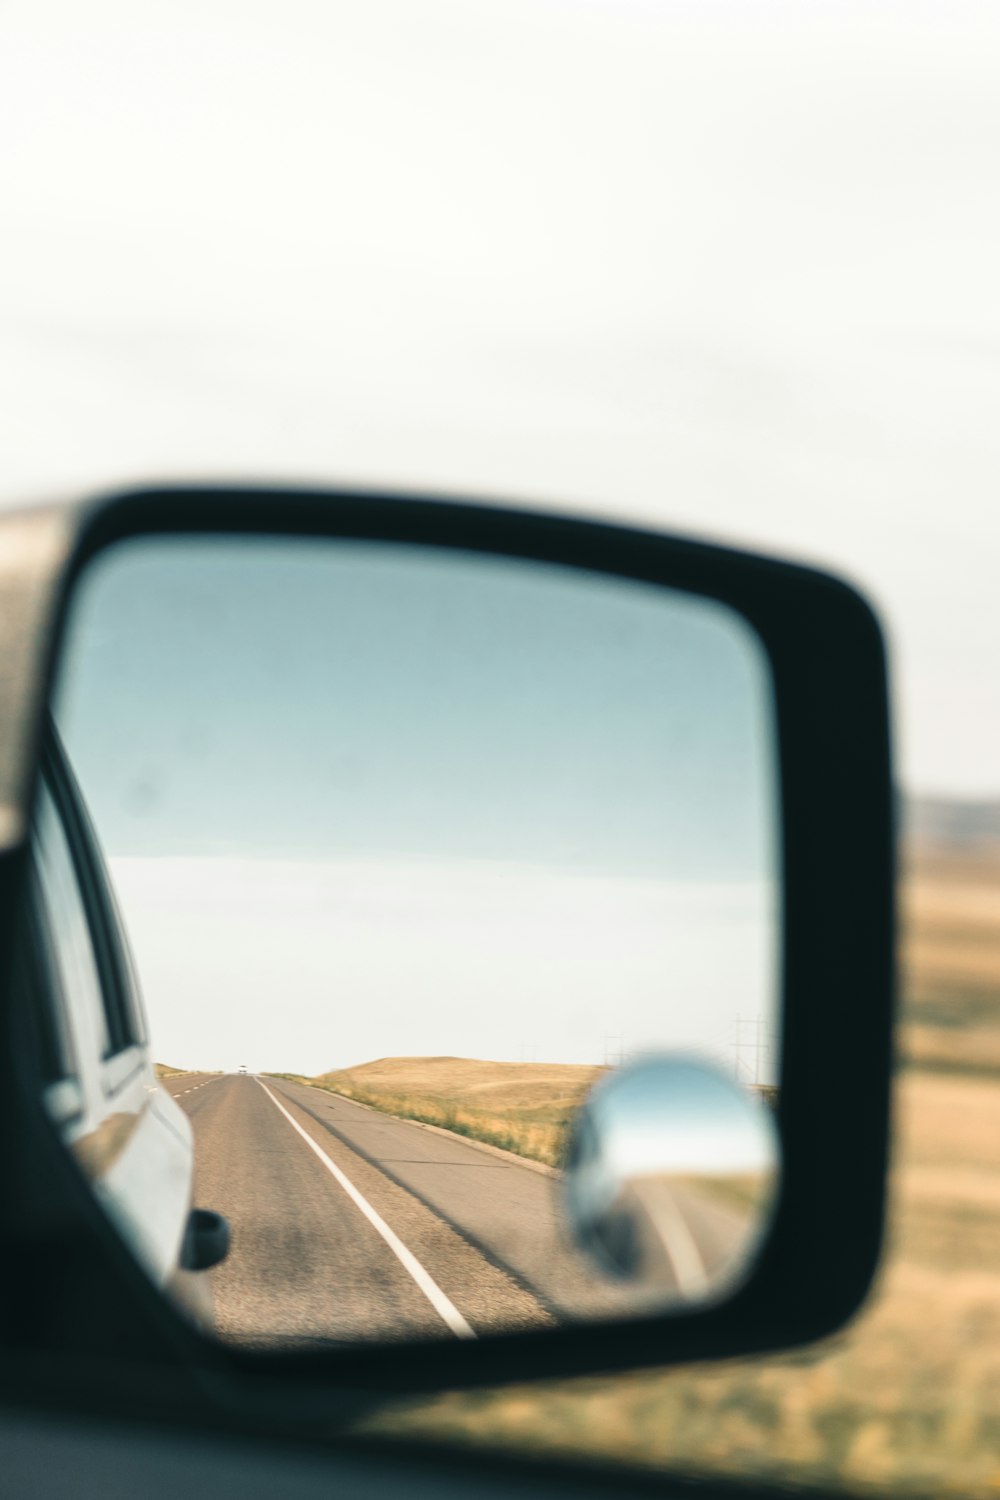 a car's side view mirror reflecting a road